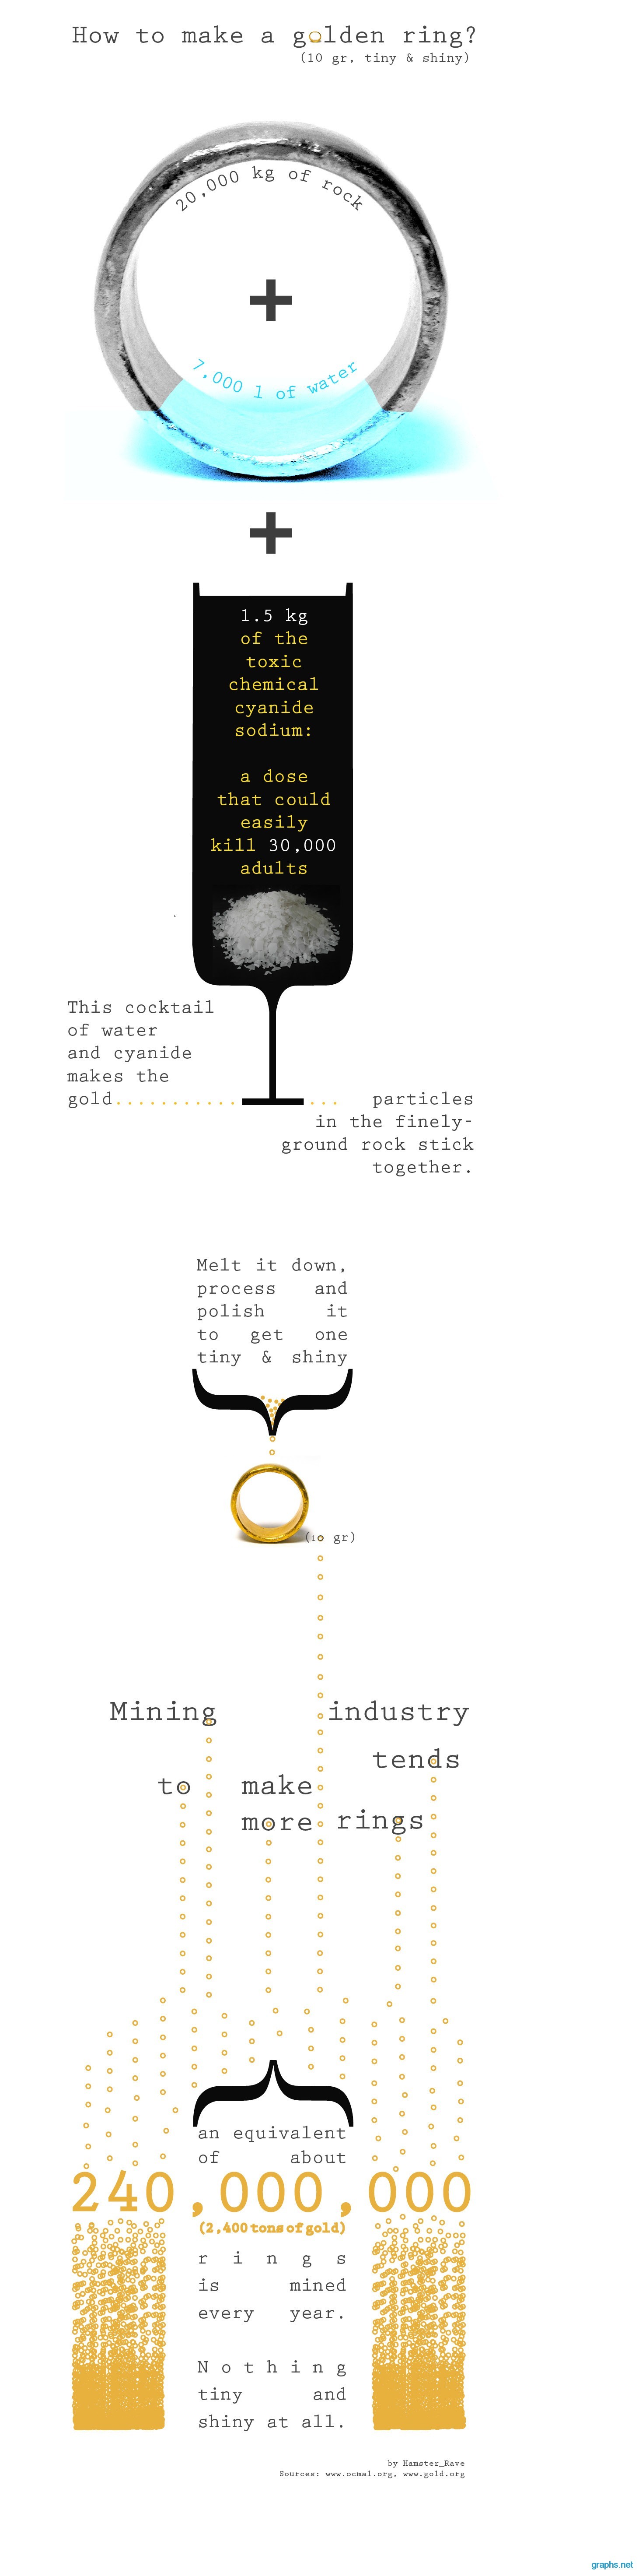 how to make a golden ring